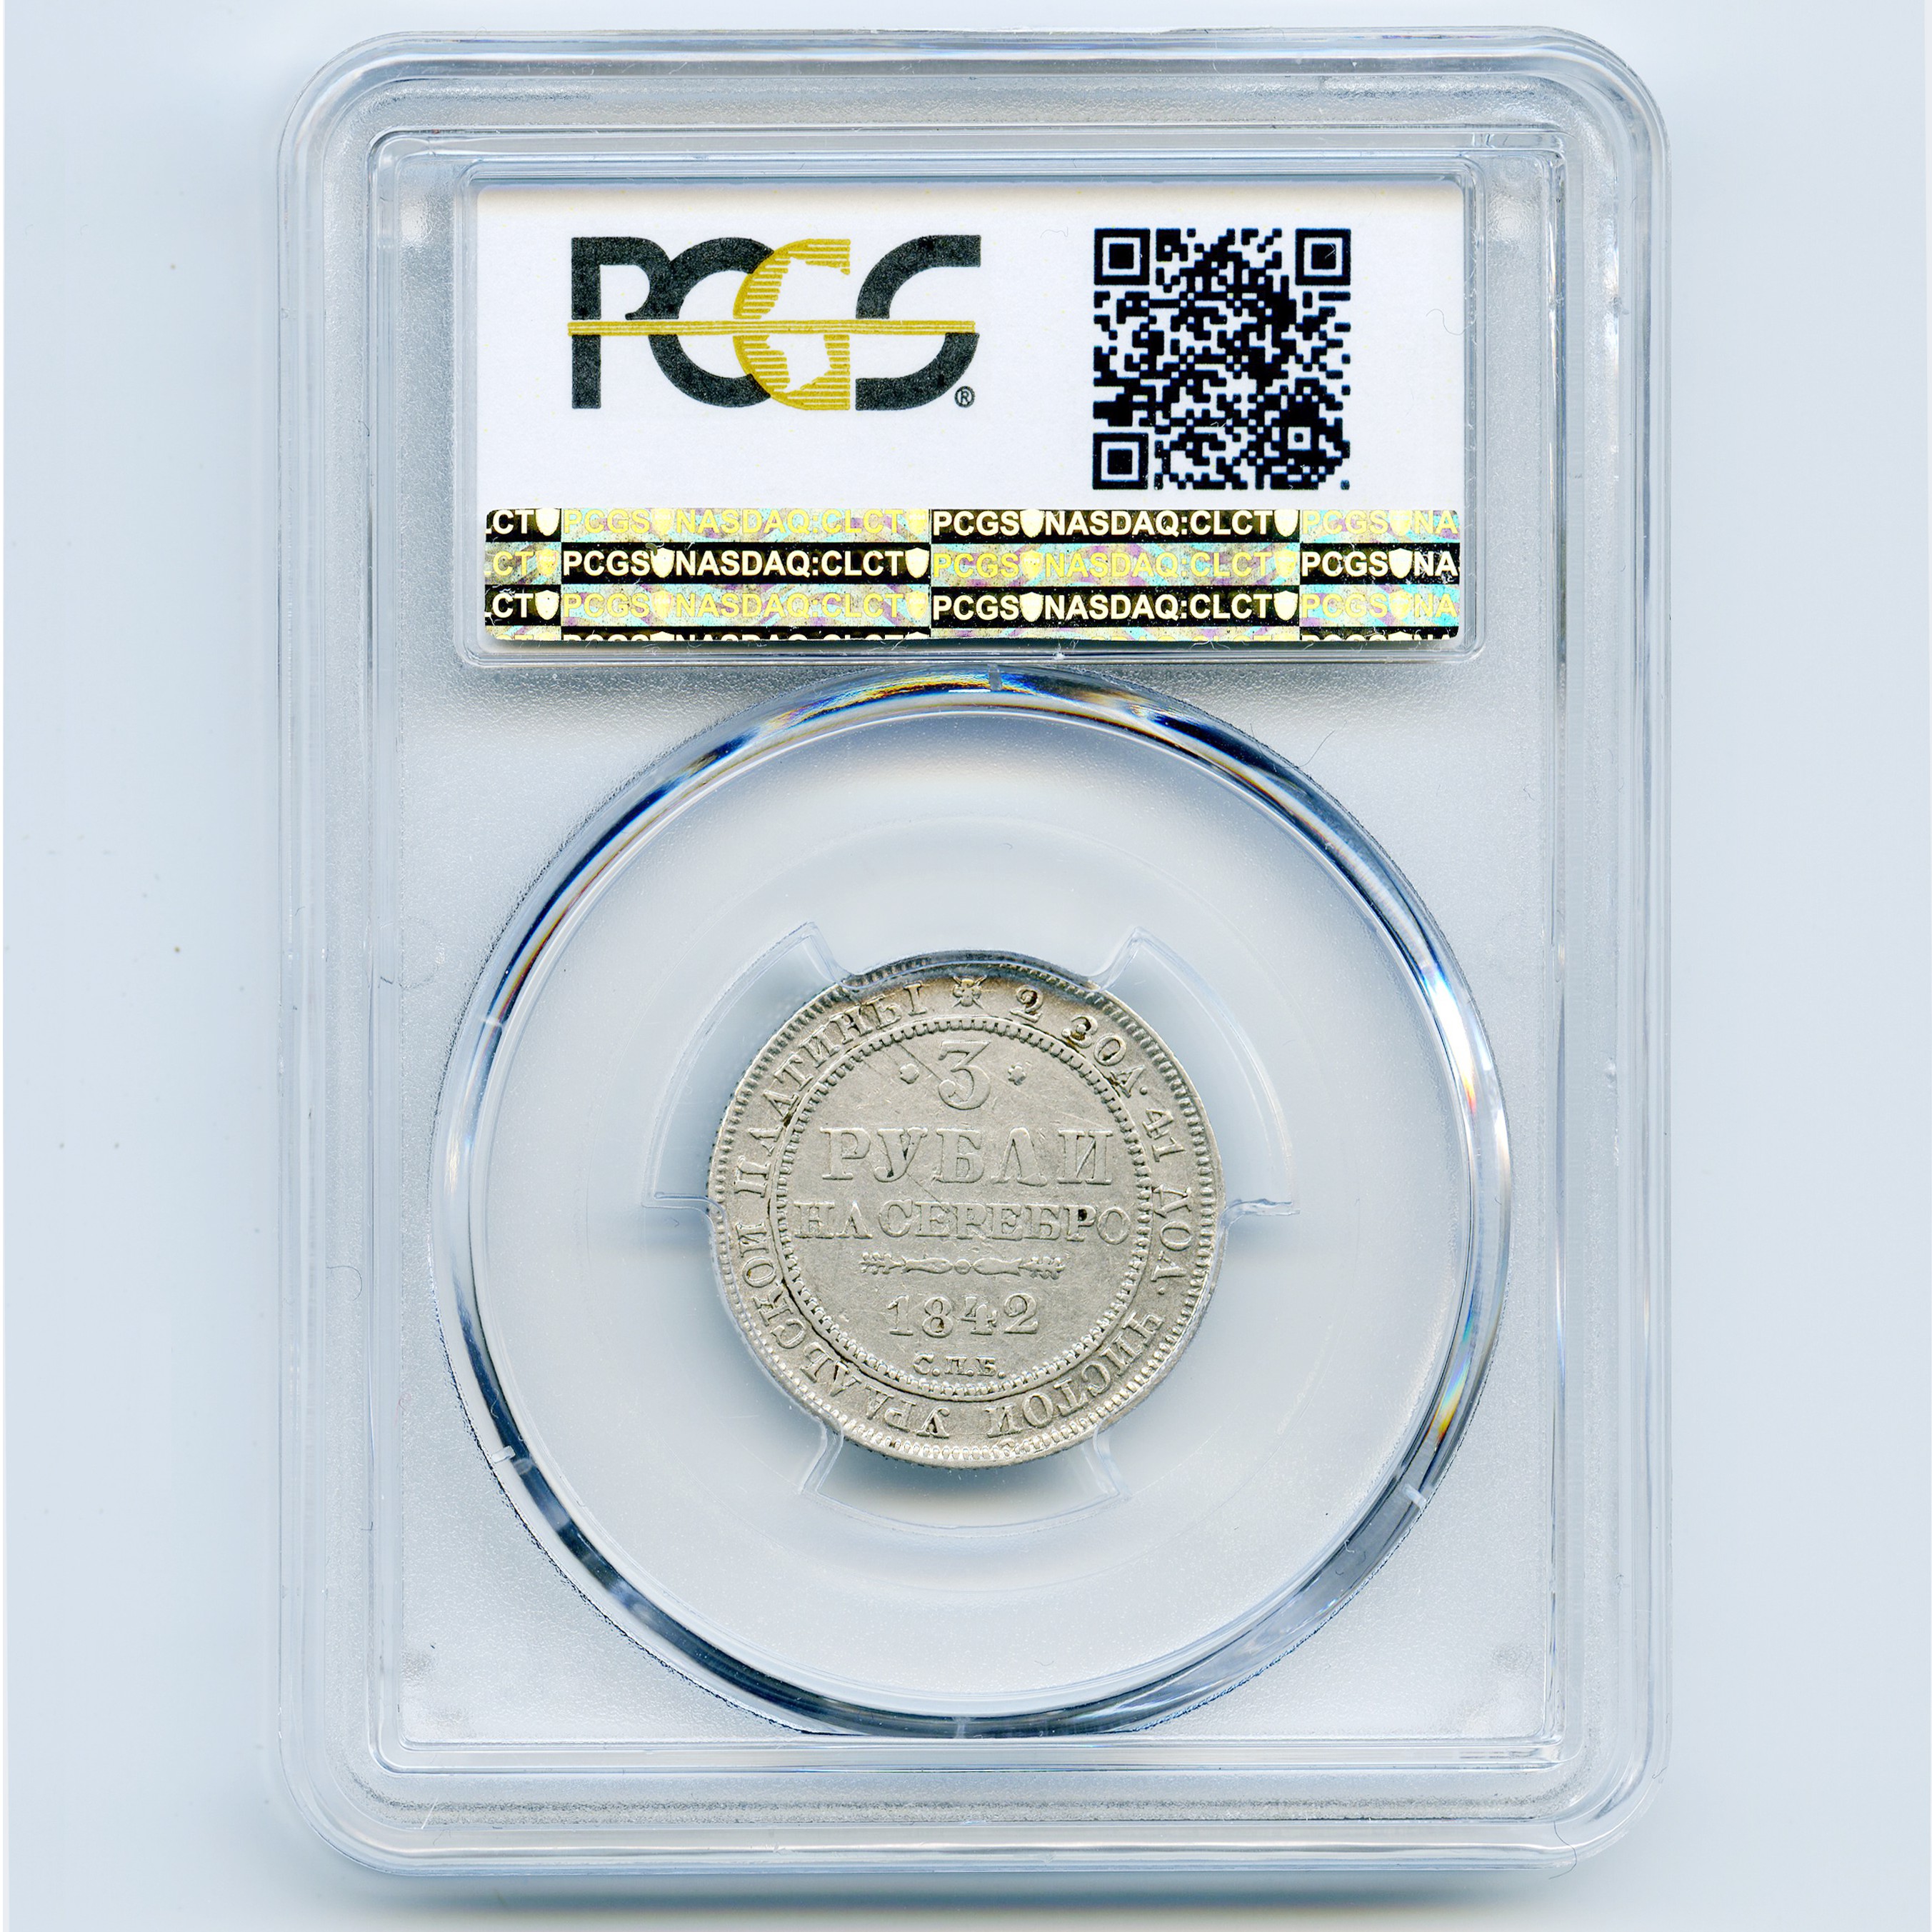 Russie - 3 Roubles - 1842 revers